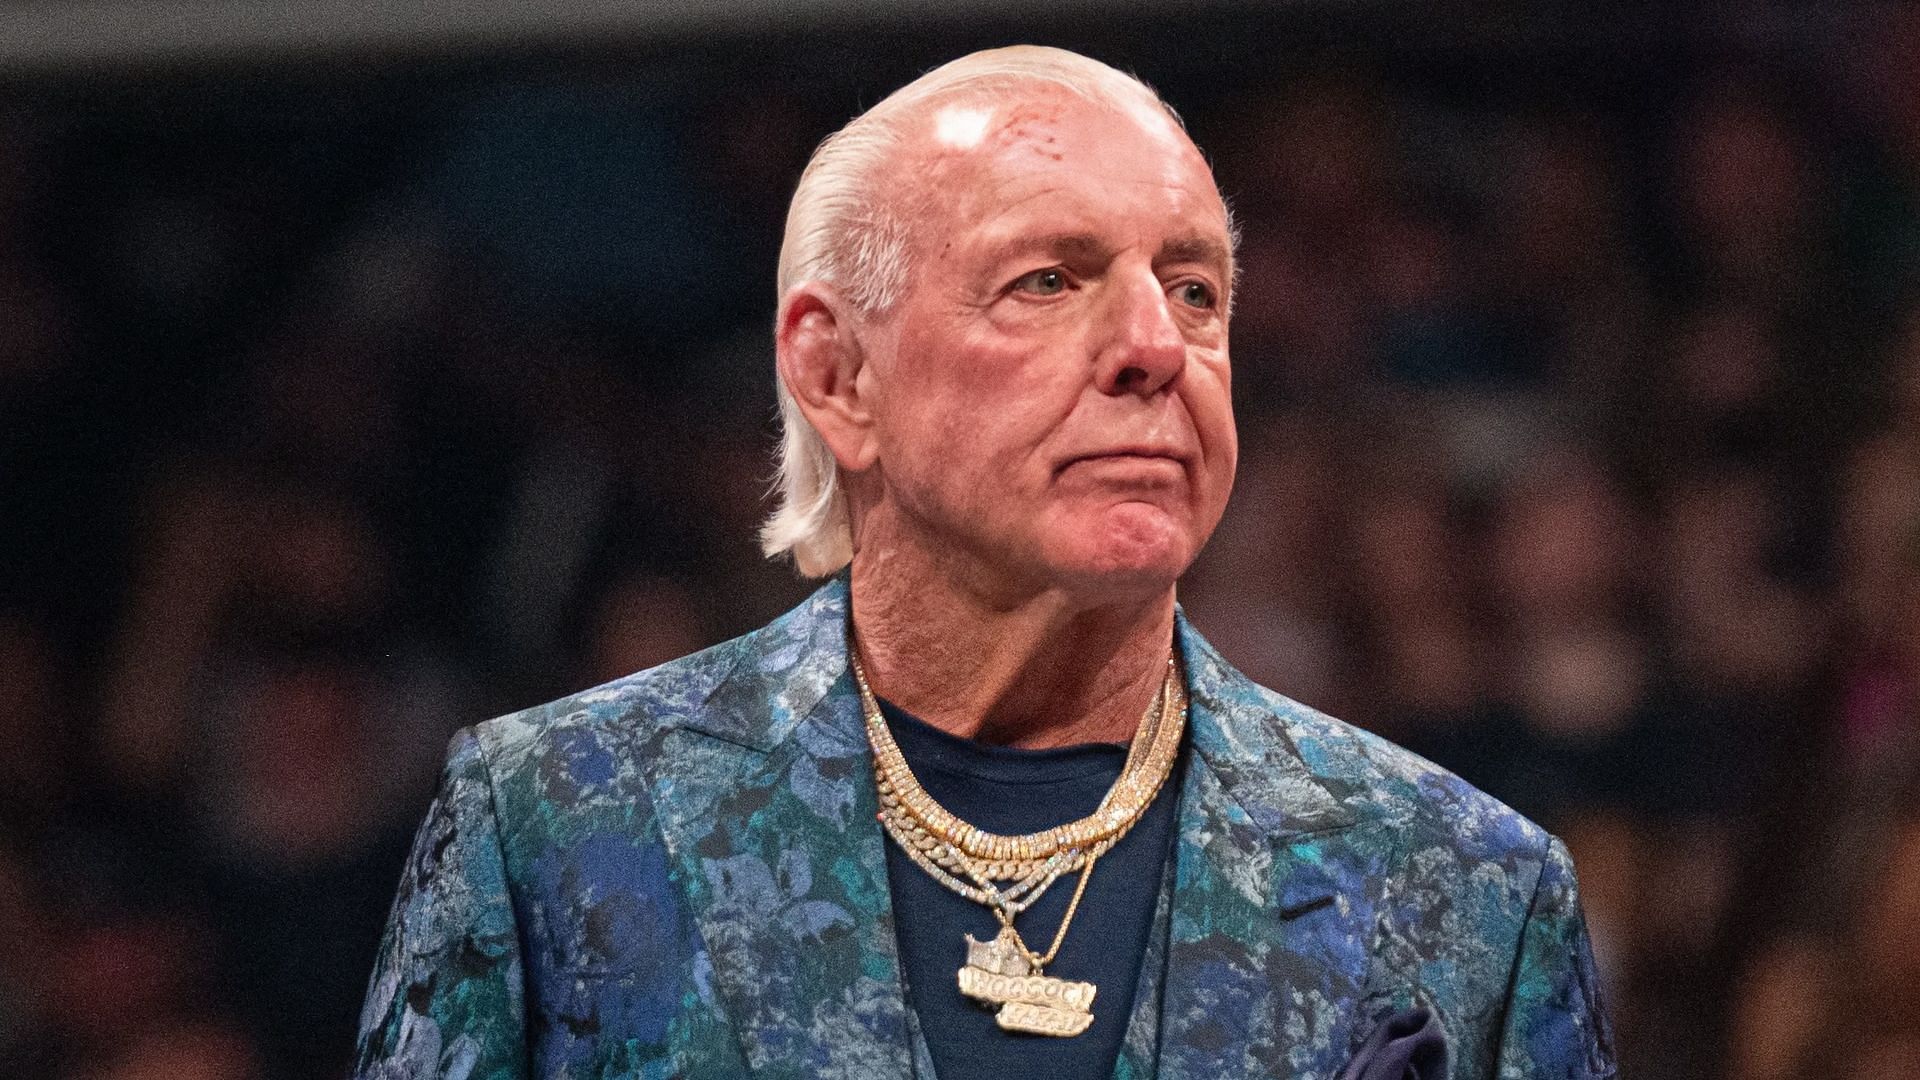 Ric Flair is currently signed with All Elite Wrestling